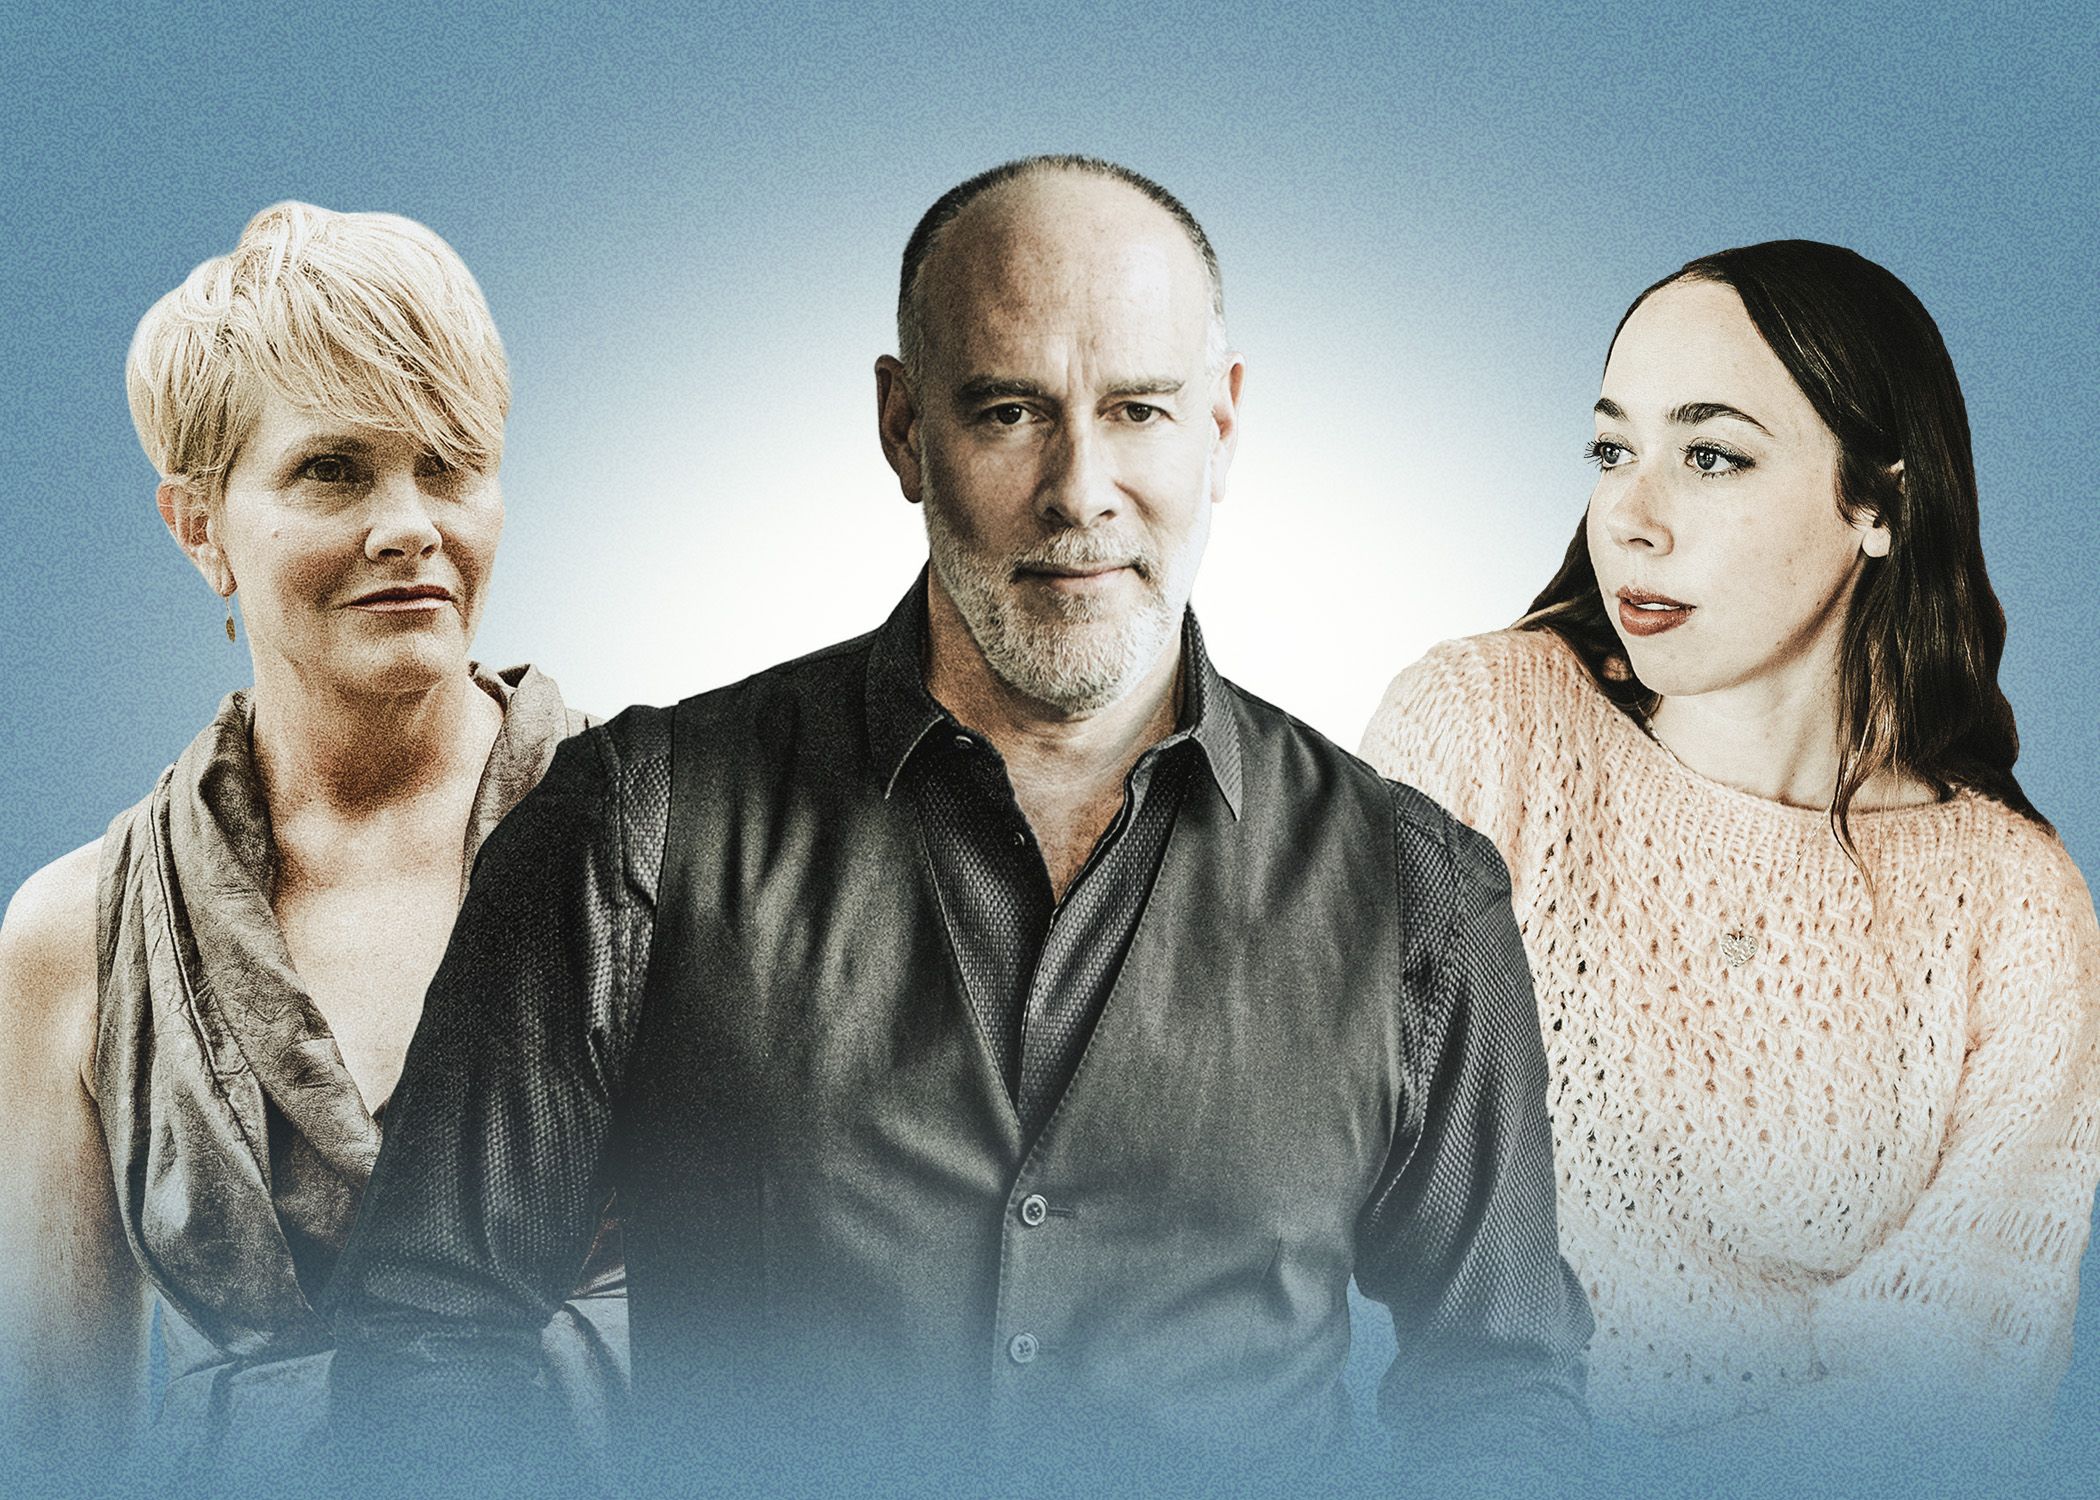 Shawn Colvin, Marc Cohn, Sara Jarosz against a blue gradient background, portraying a range of emotions and styles.